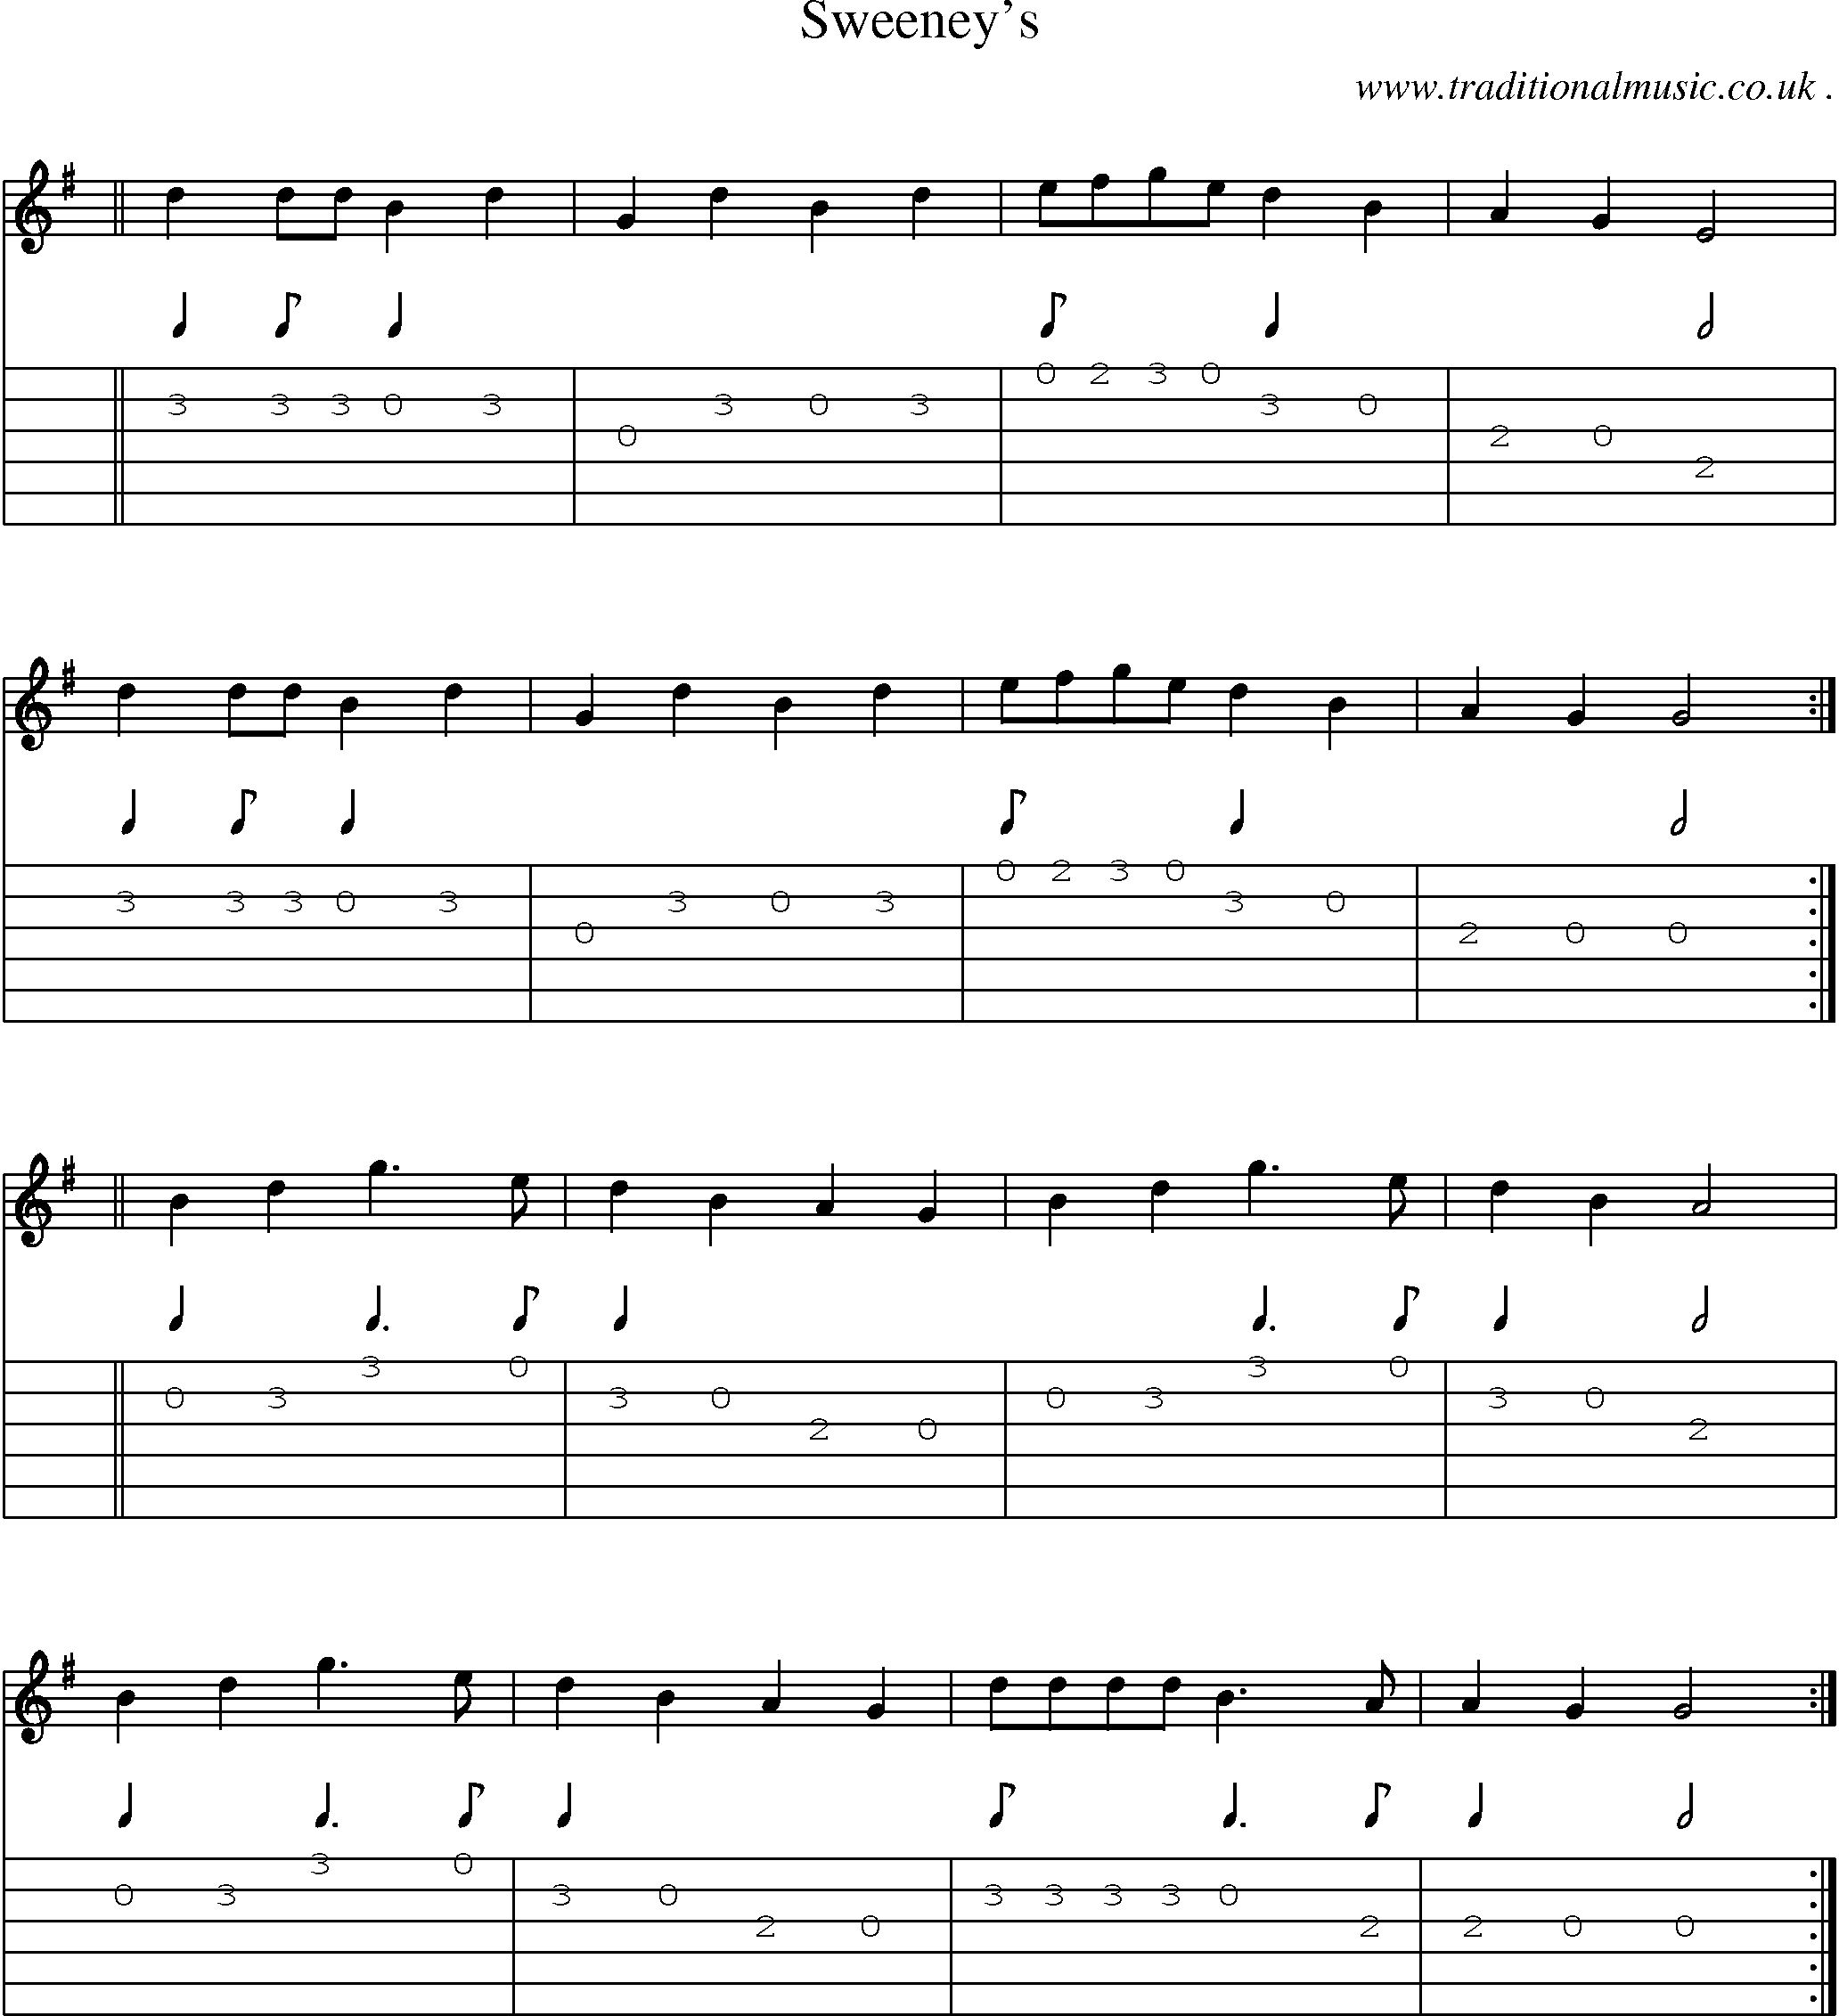 Sheet-Music and Guitar Tabs for Sweeneys